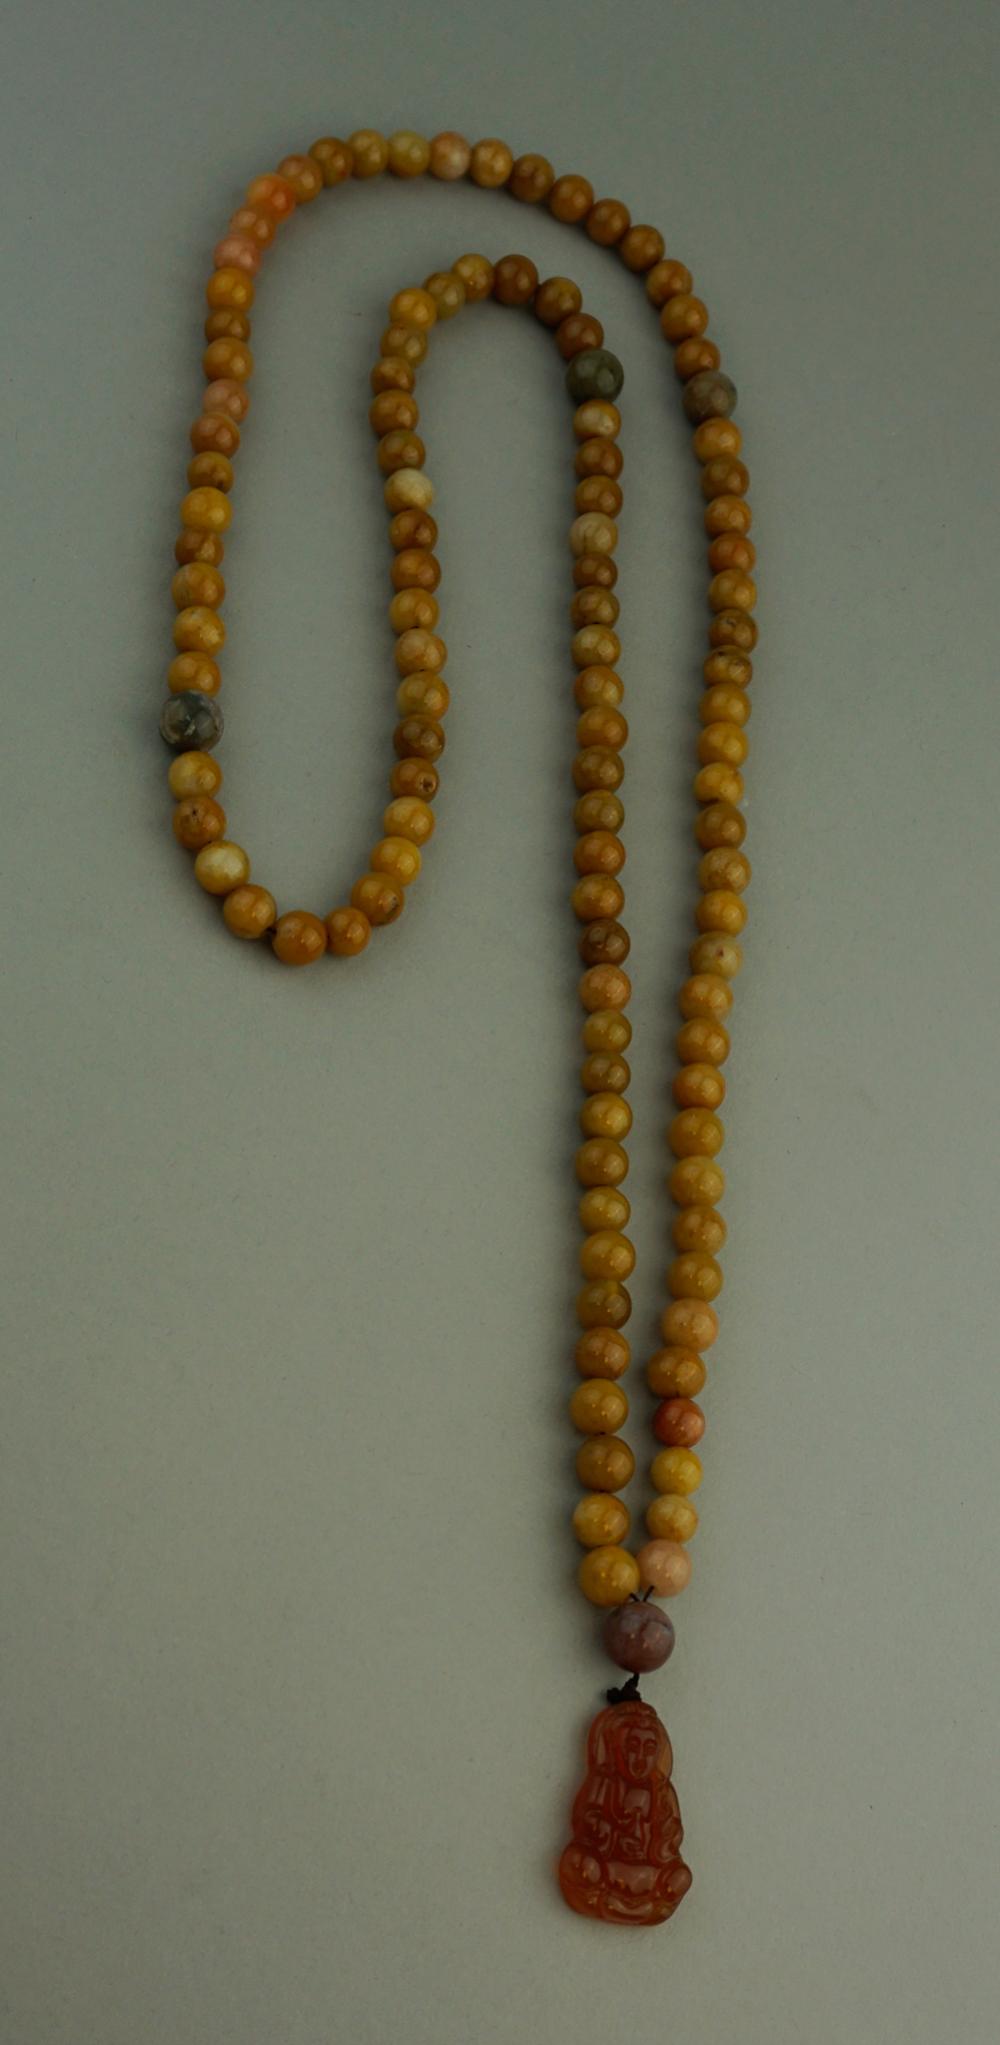 35422 357 JADE BEAD NECKLACE WITH 33a517